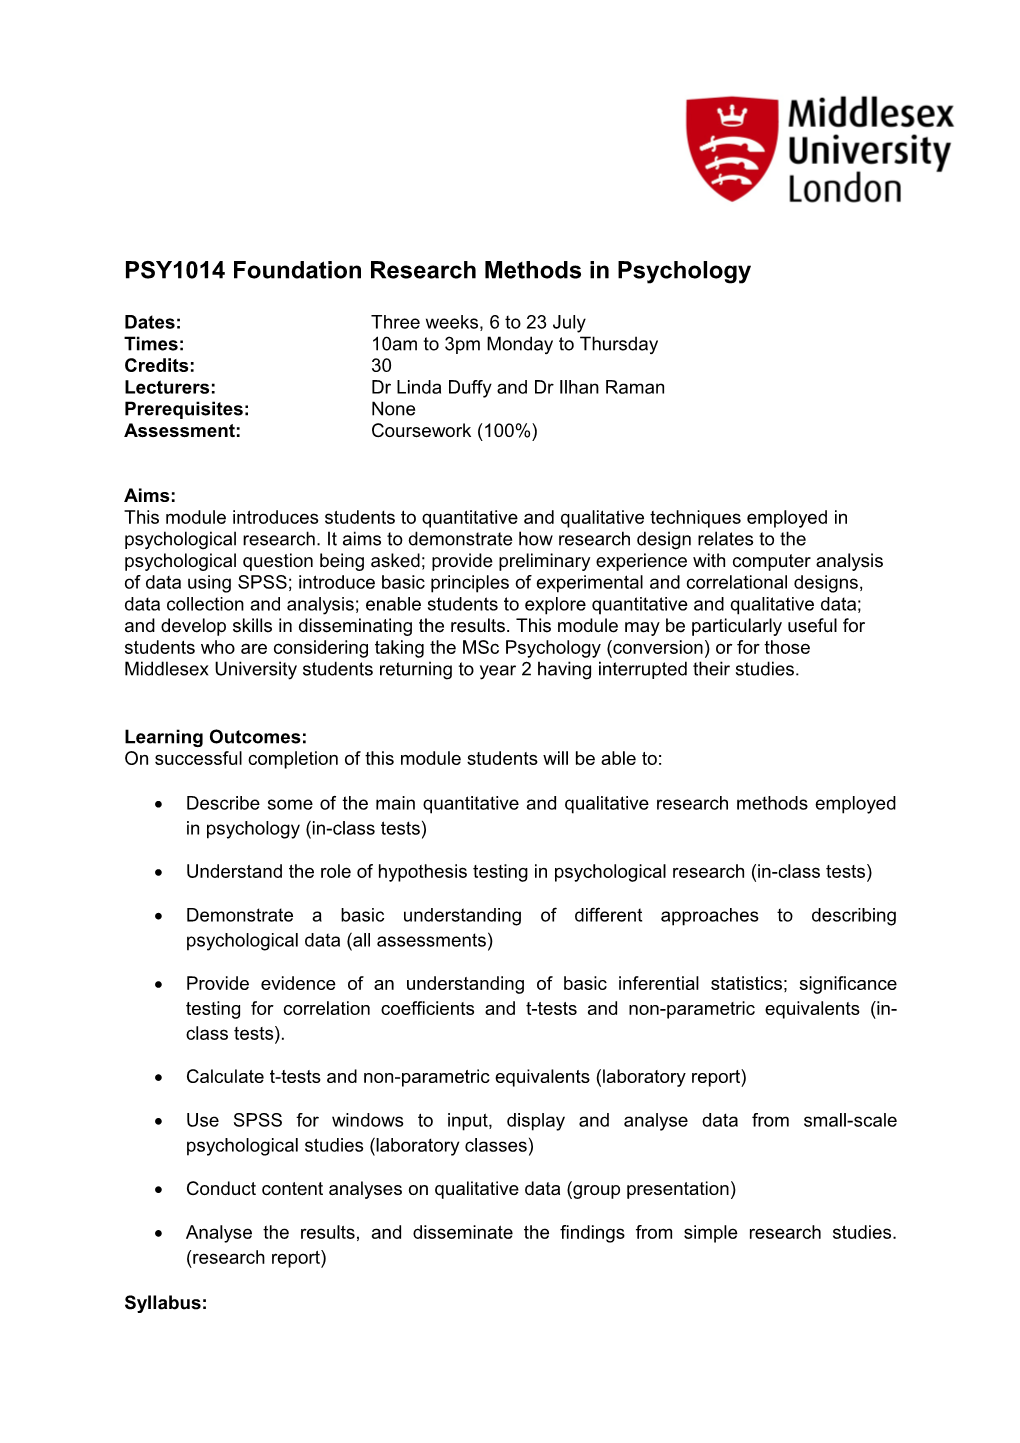 PSY1014 Foundation Research Methods in Psychology